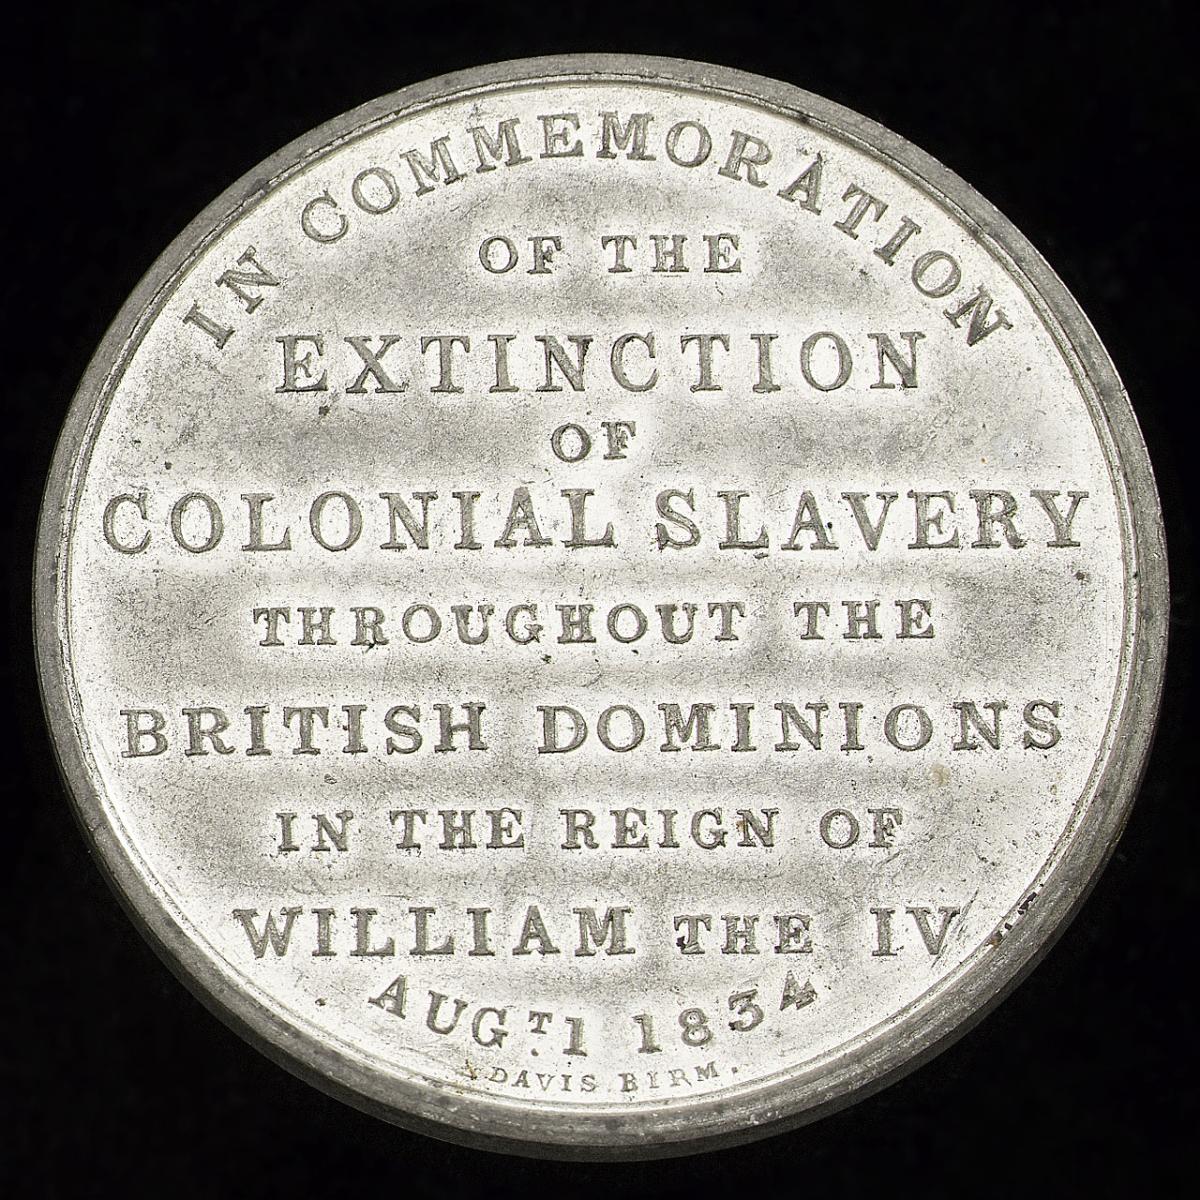 A silver medal commemorating the abolition of slavery. The embossed words read: 'In commemoration of the extinction of colonial slavery throughout the British dominions in the reign of William the IV - Aug 1 1834'